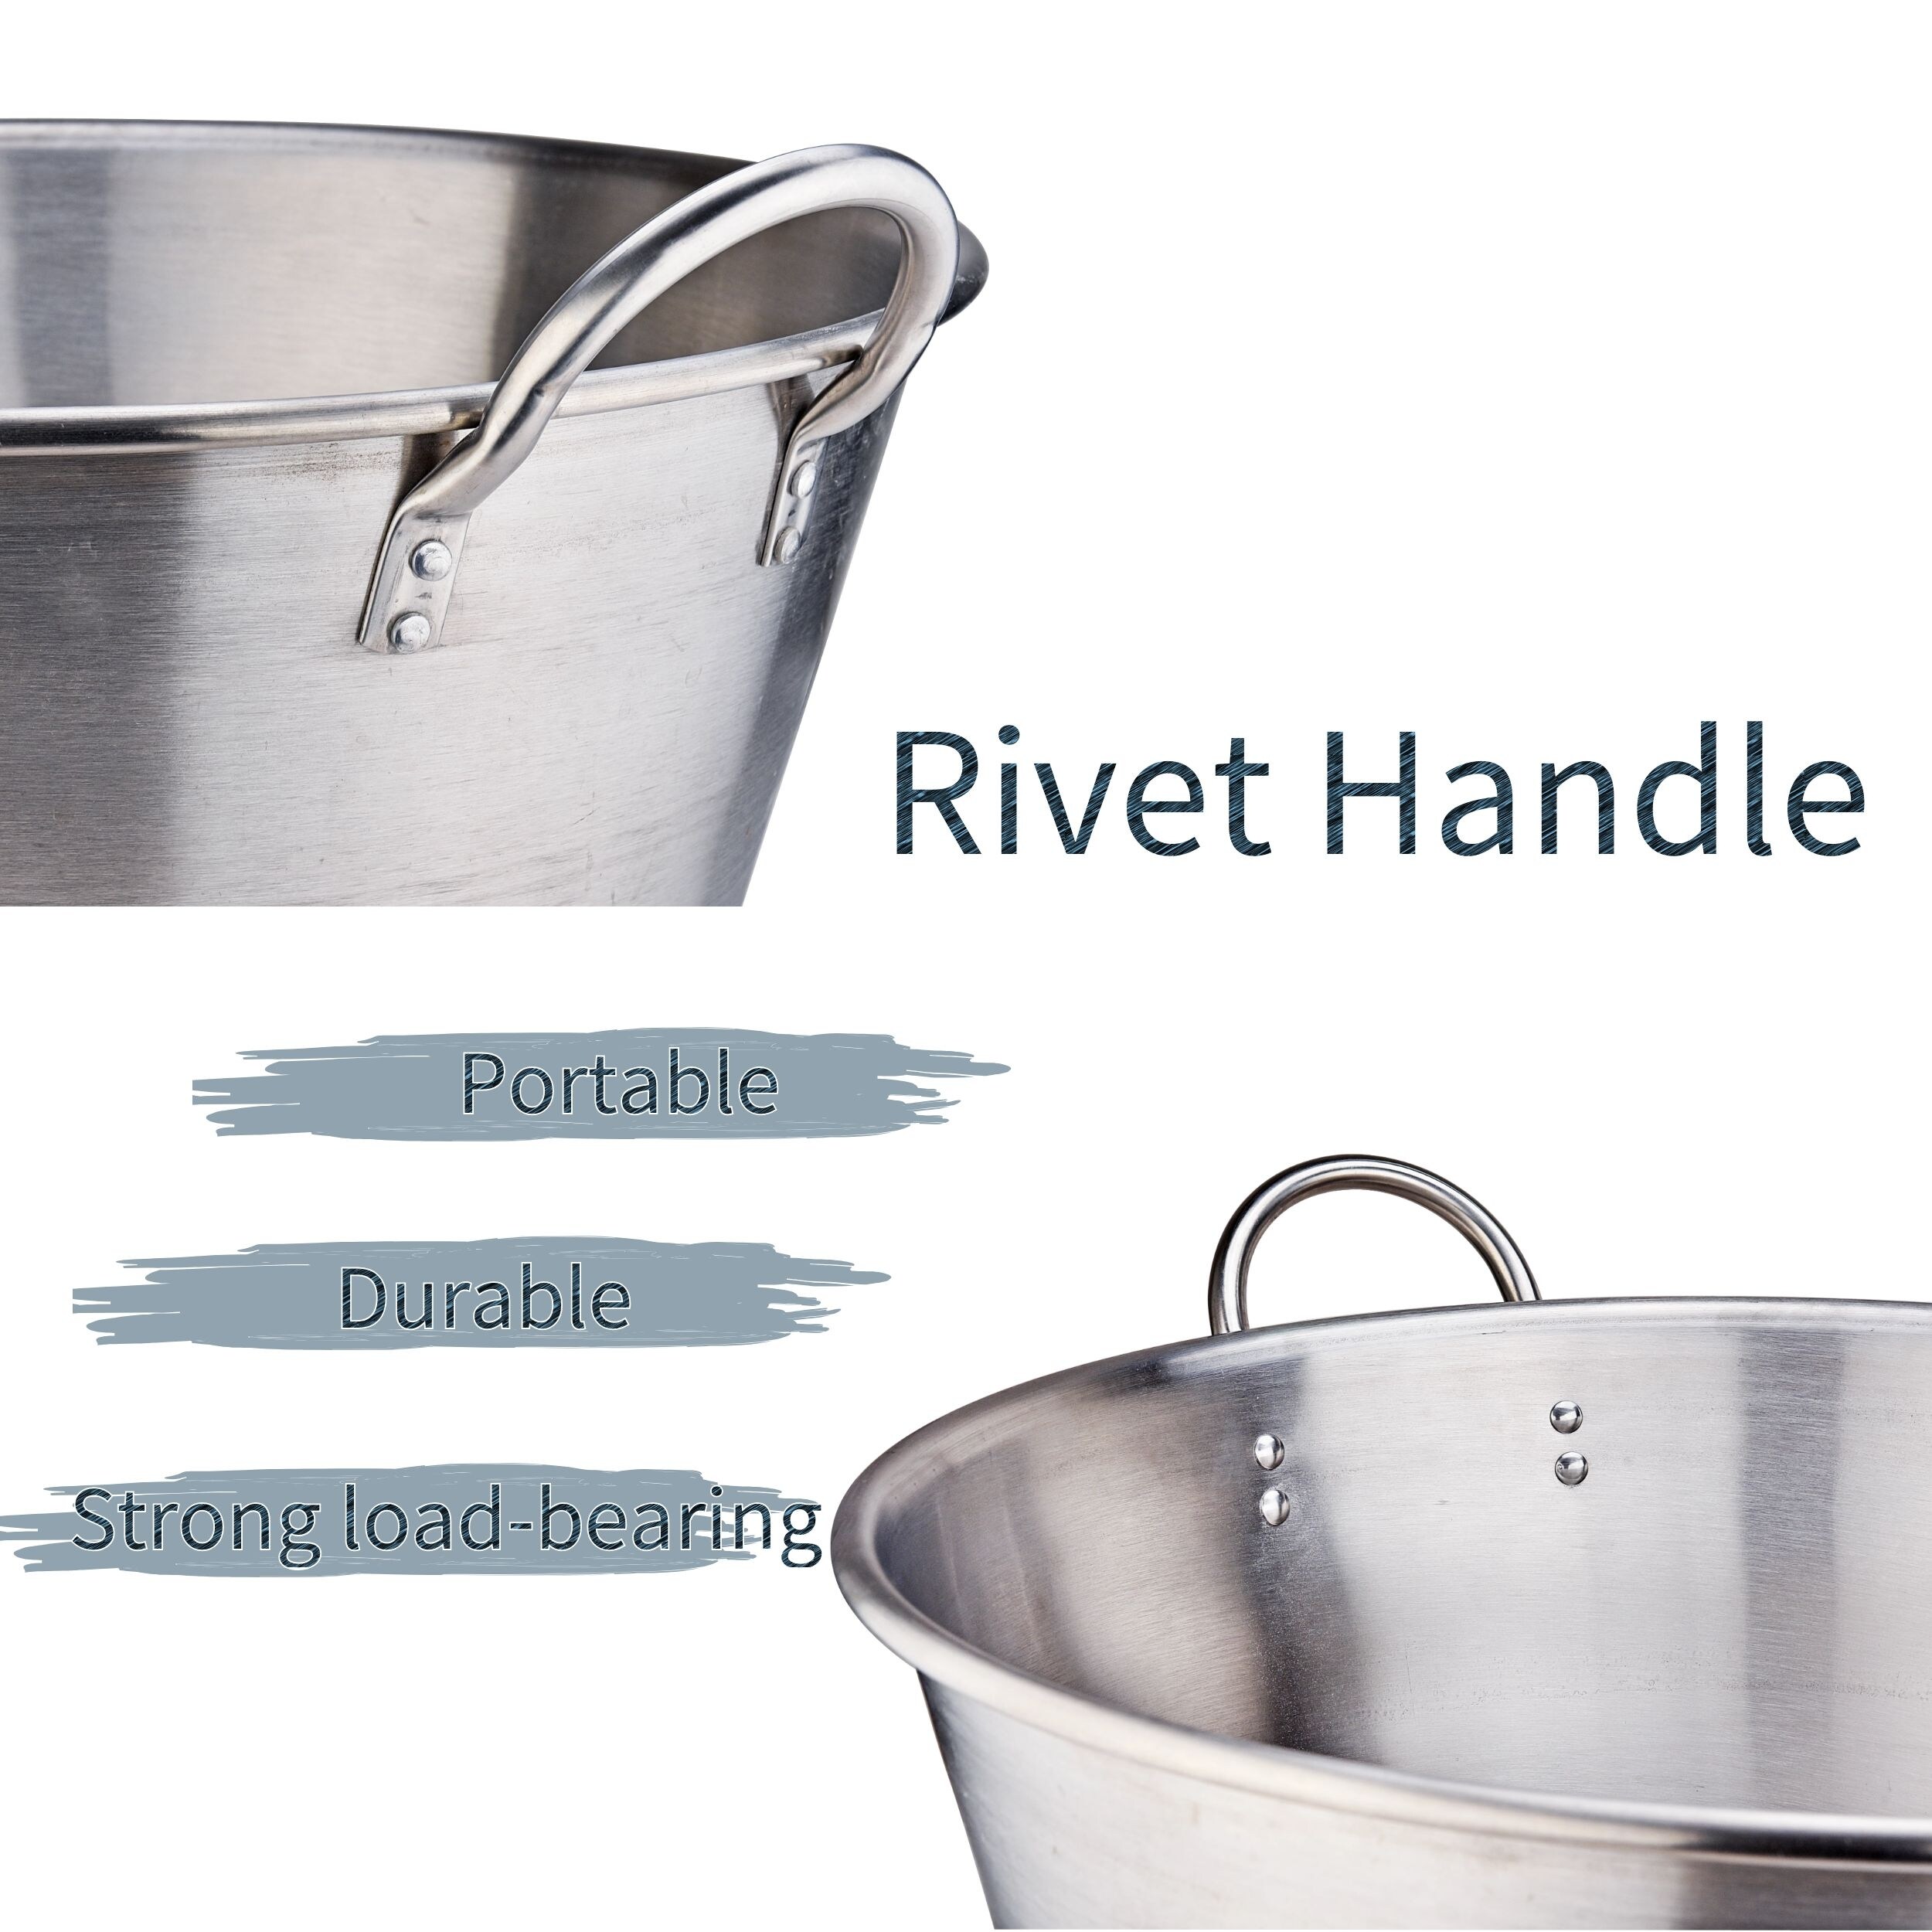 ARC Advanced Royal Champion 64-Quart Stainless Steel Stock Pot and